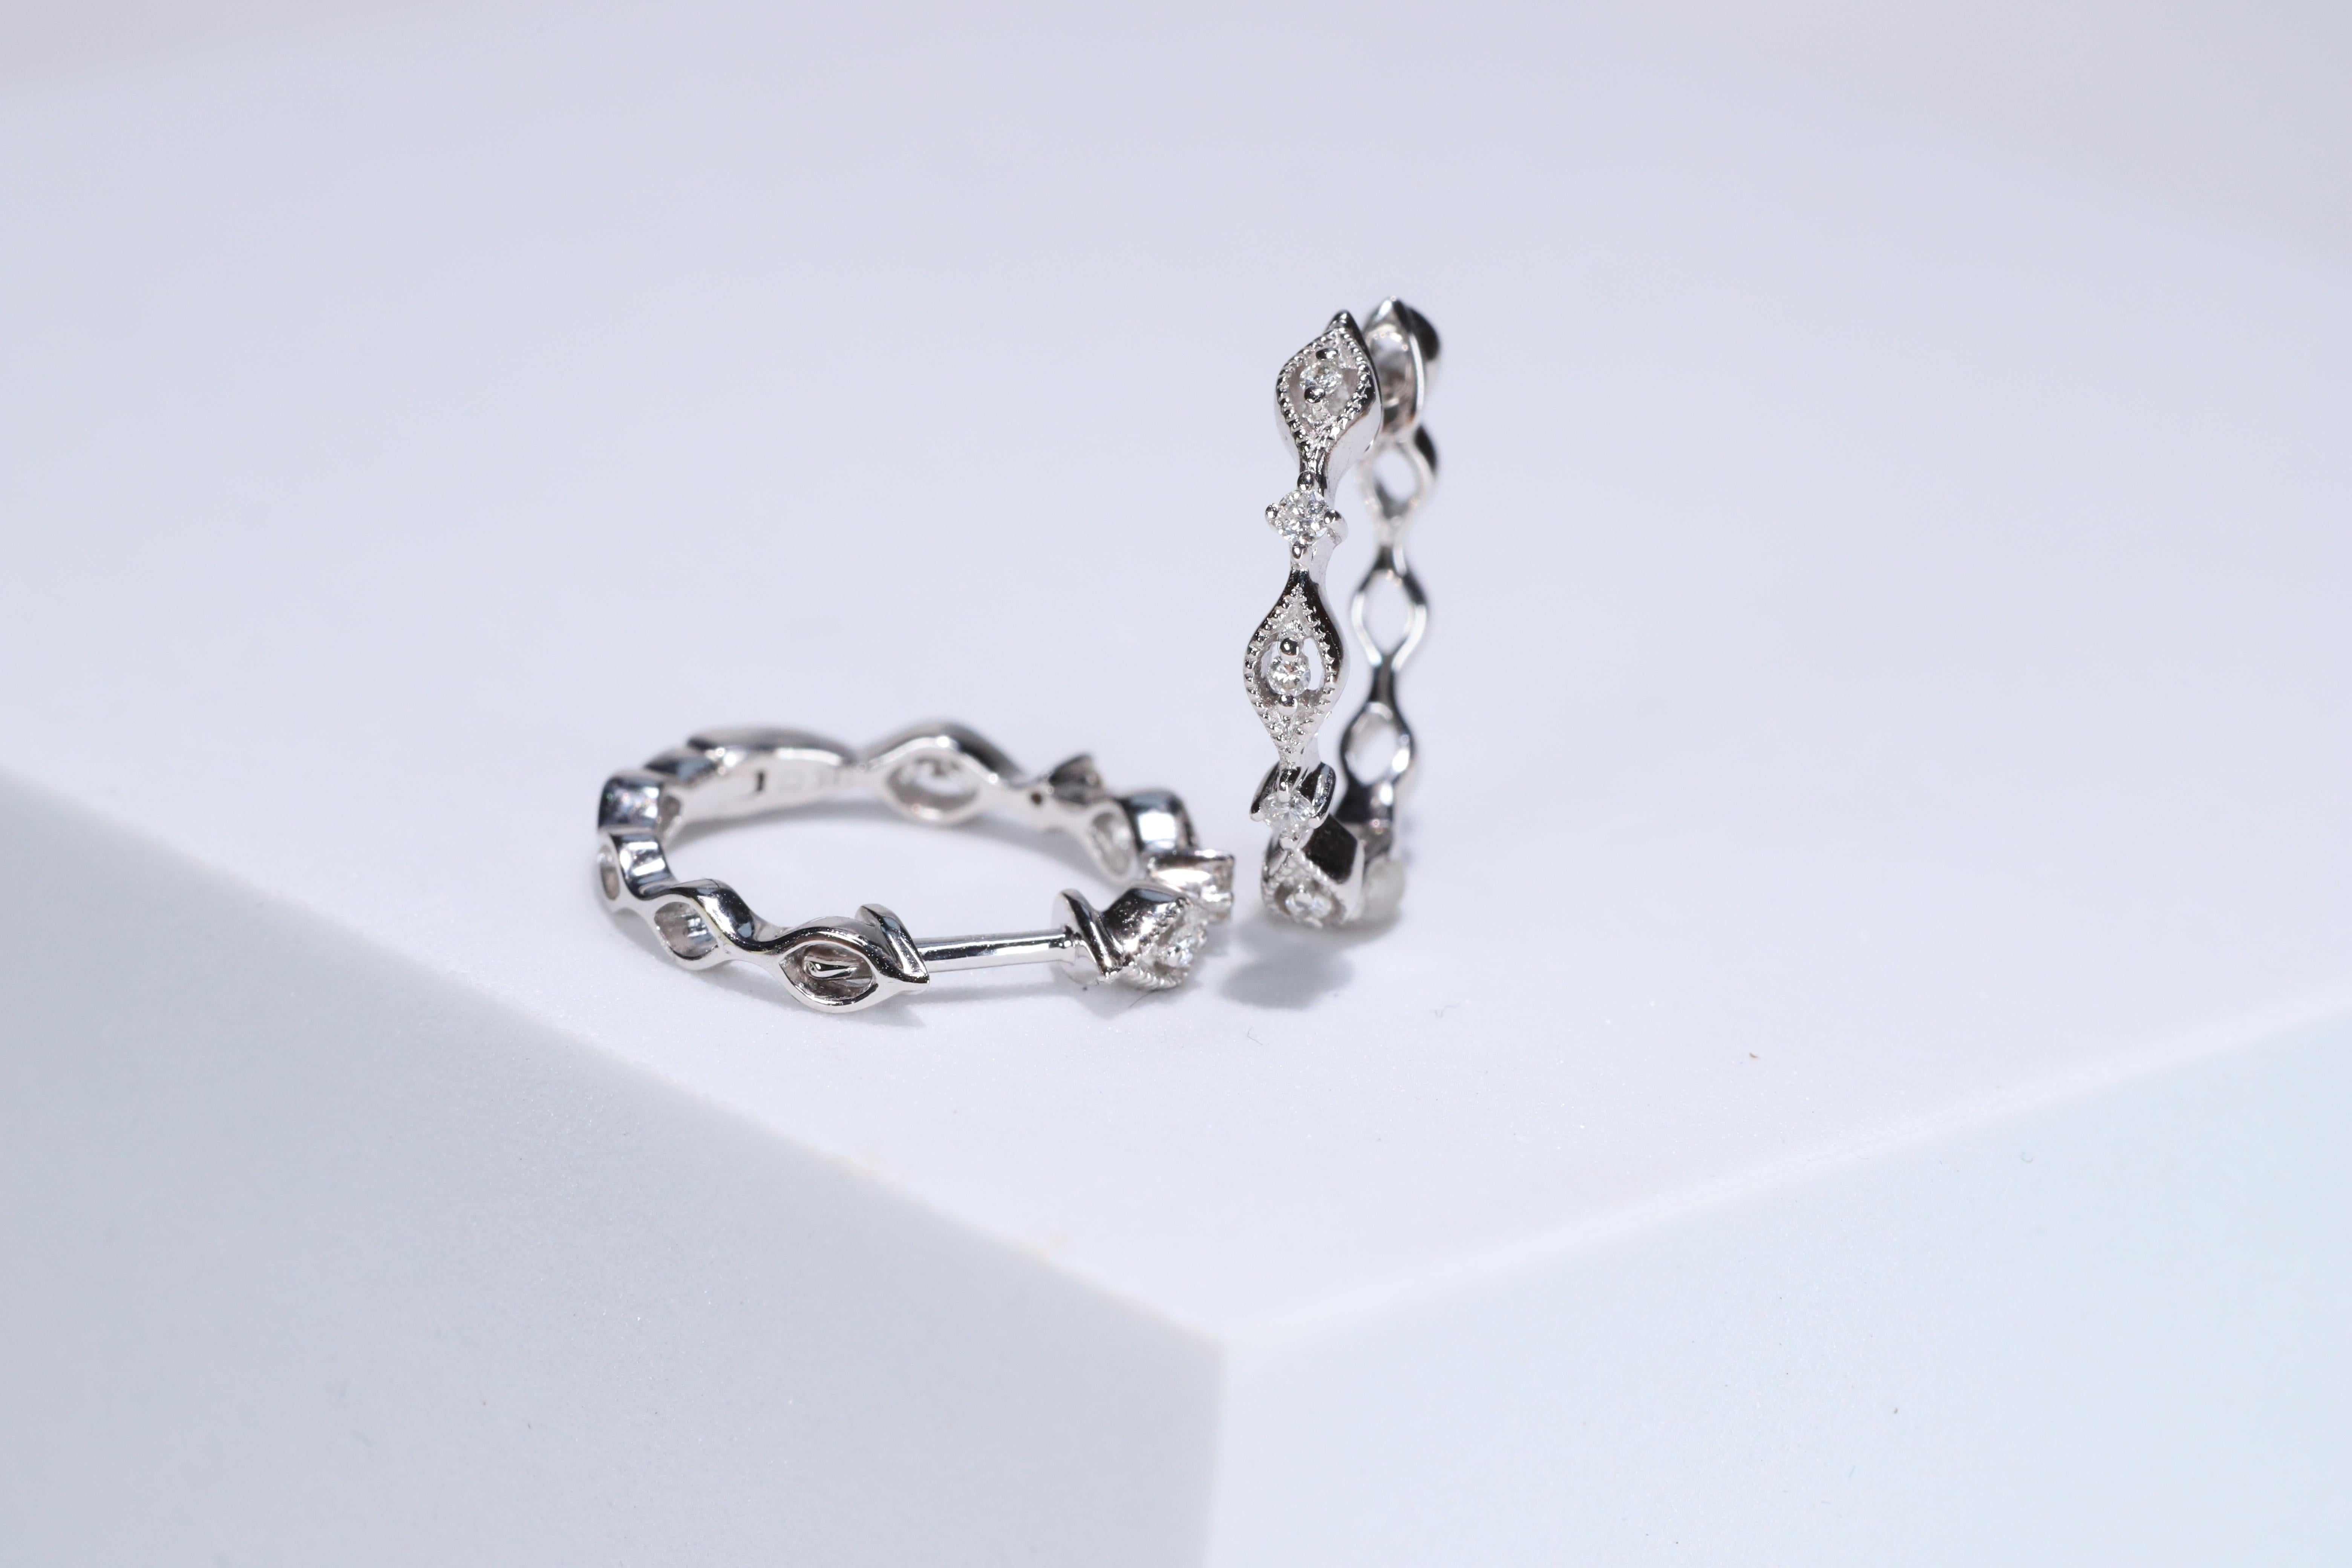 Each of these pretty earrings from Gin & Grace features a on a lever back clasp adorned with white diamonds. These earrings are made of rich 14-karat White gold with a high polish. Diamonds: 10 pcs Diamond cut: Round Diamond weight: 0.11 carat